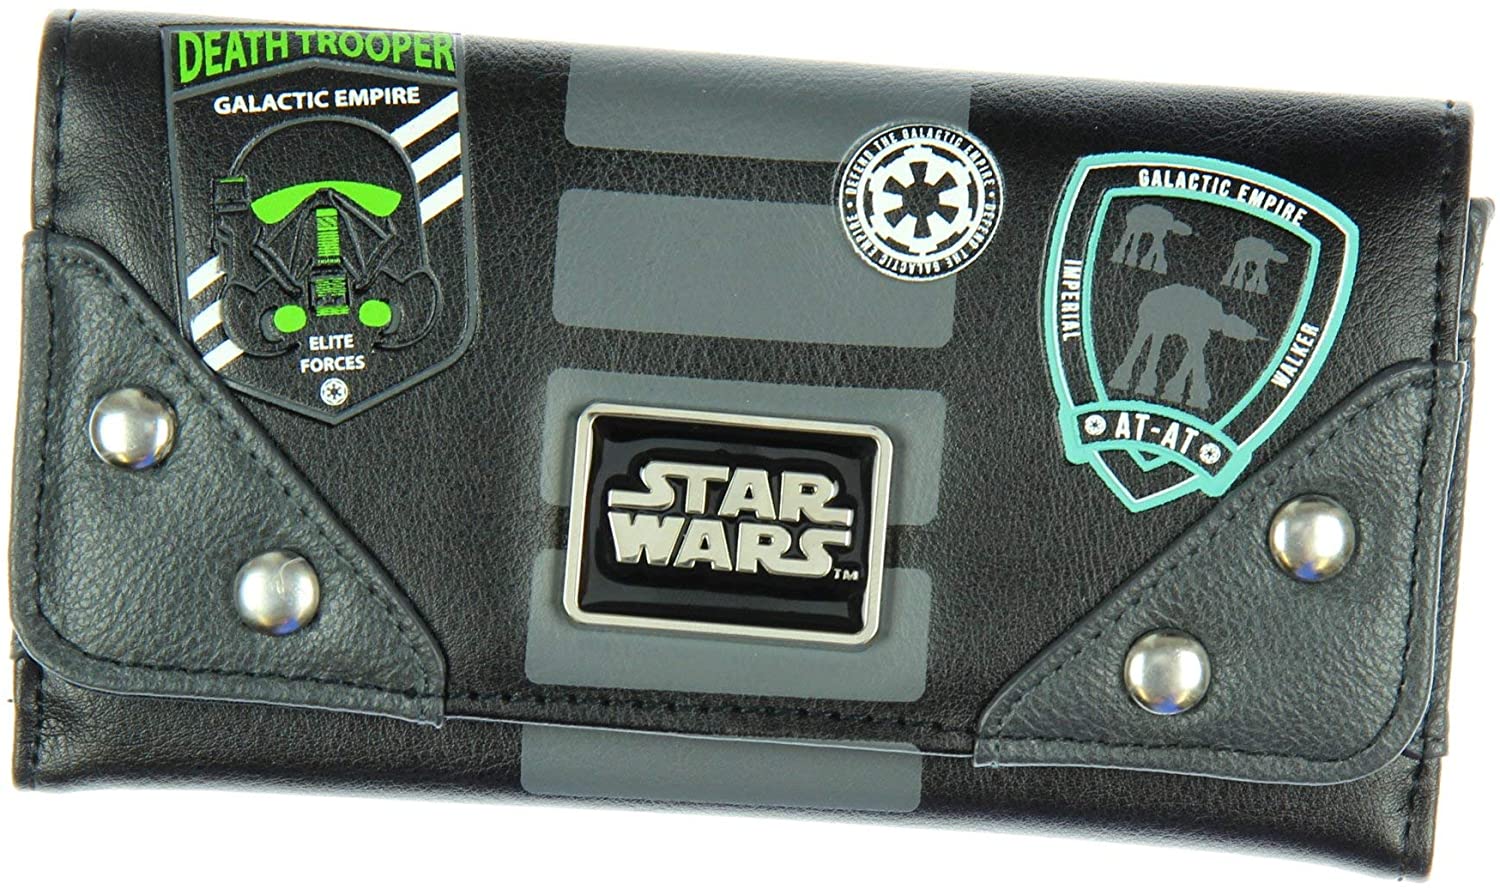 Star Wars Rogue One: Empire-Themed Flap Wallet - Galactic Empire & Death Trooper Design